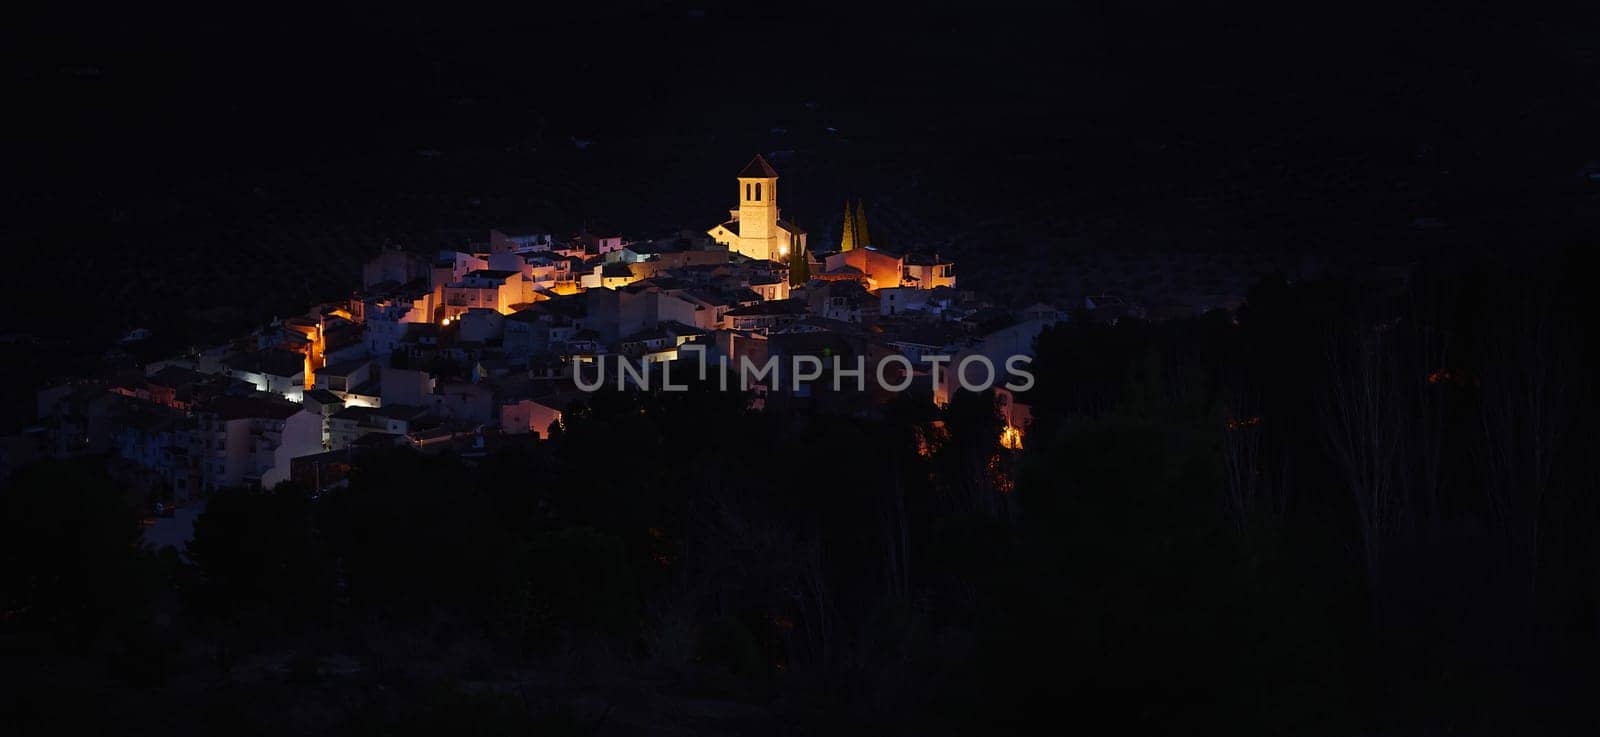 View from the hill of medieval historical village of Quesada in province of Jaen, with the illuminated bell tower and while houses in the night time. Beauty in Spain nature. Travel and tourism concept